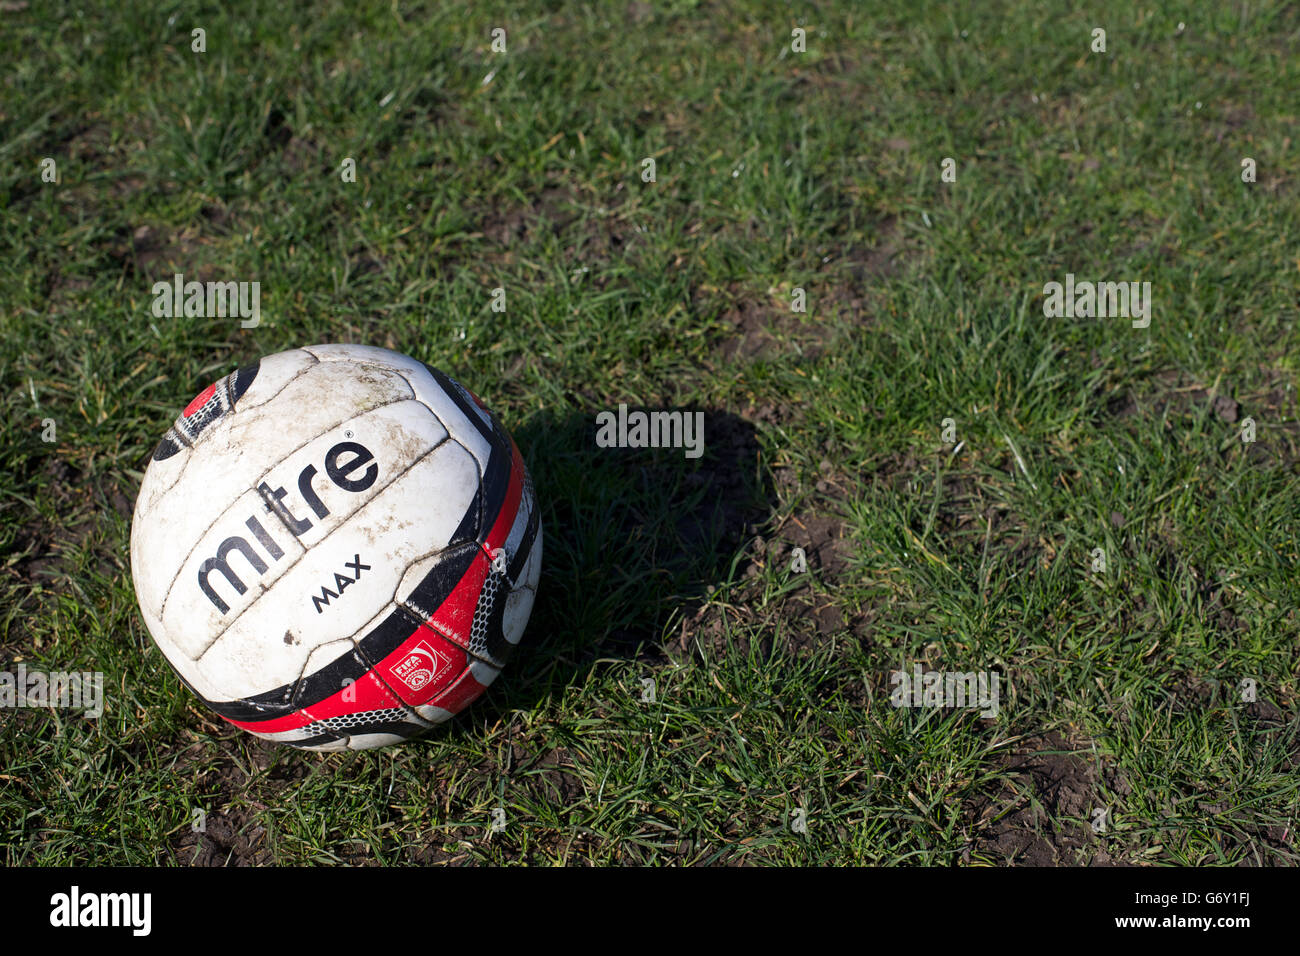 Soccer - Independent South Essex Football League - Sunday Morning Football - AC Milano v Lessa Athletic and Boleyn FC v Cranham. A worn out match day ball on the pitch Stock Photo